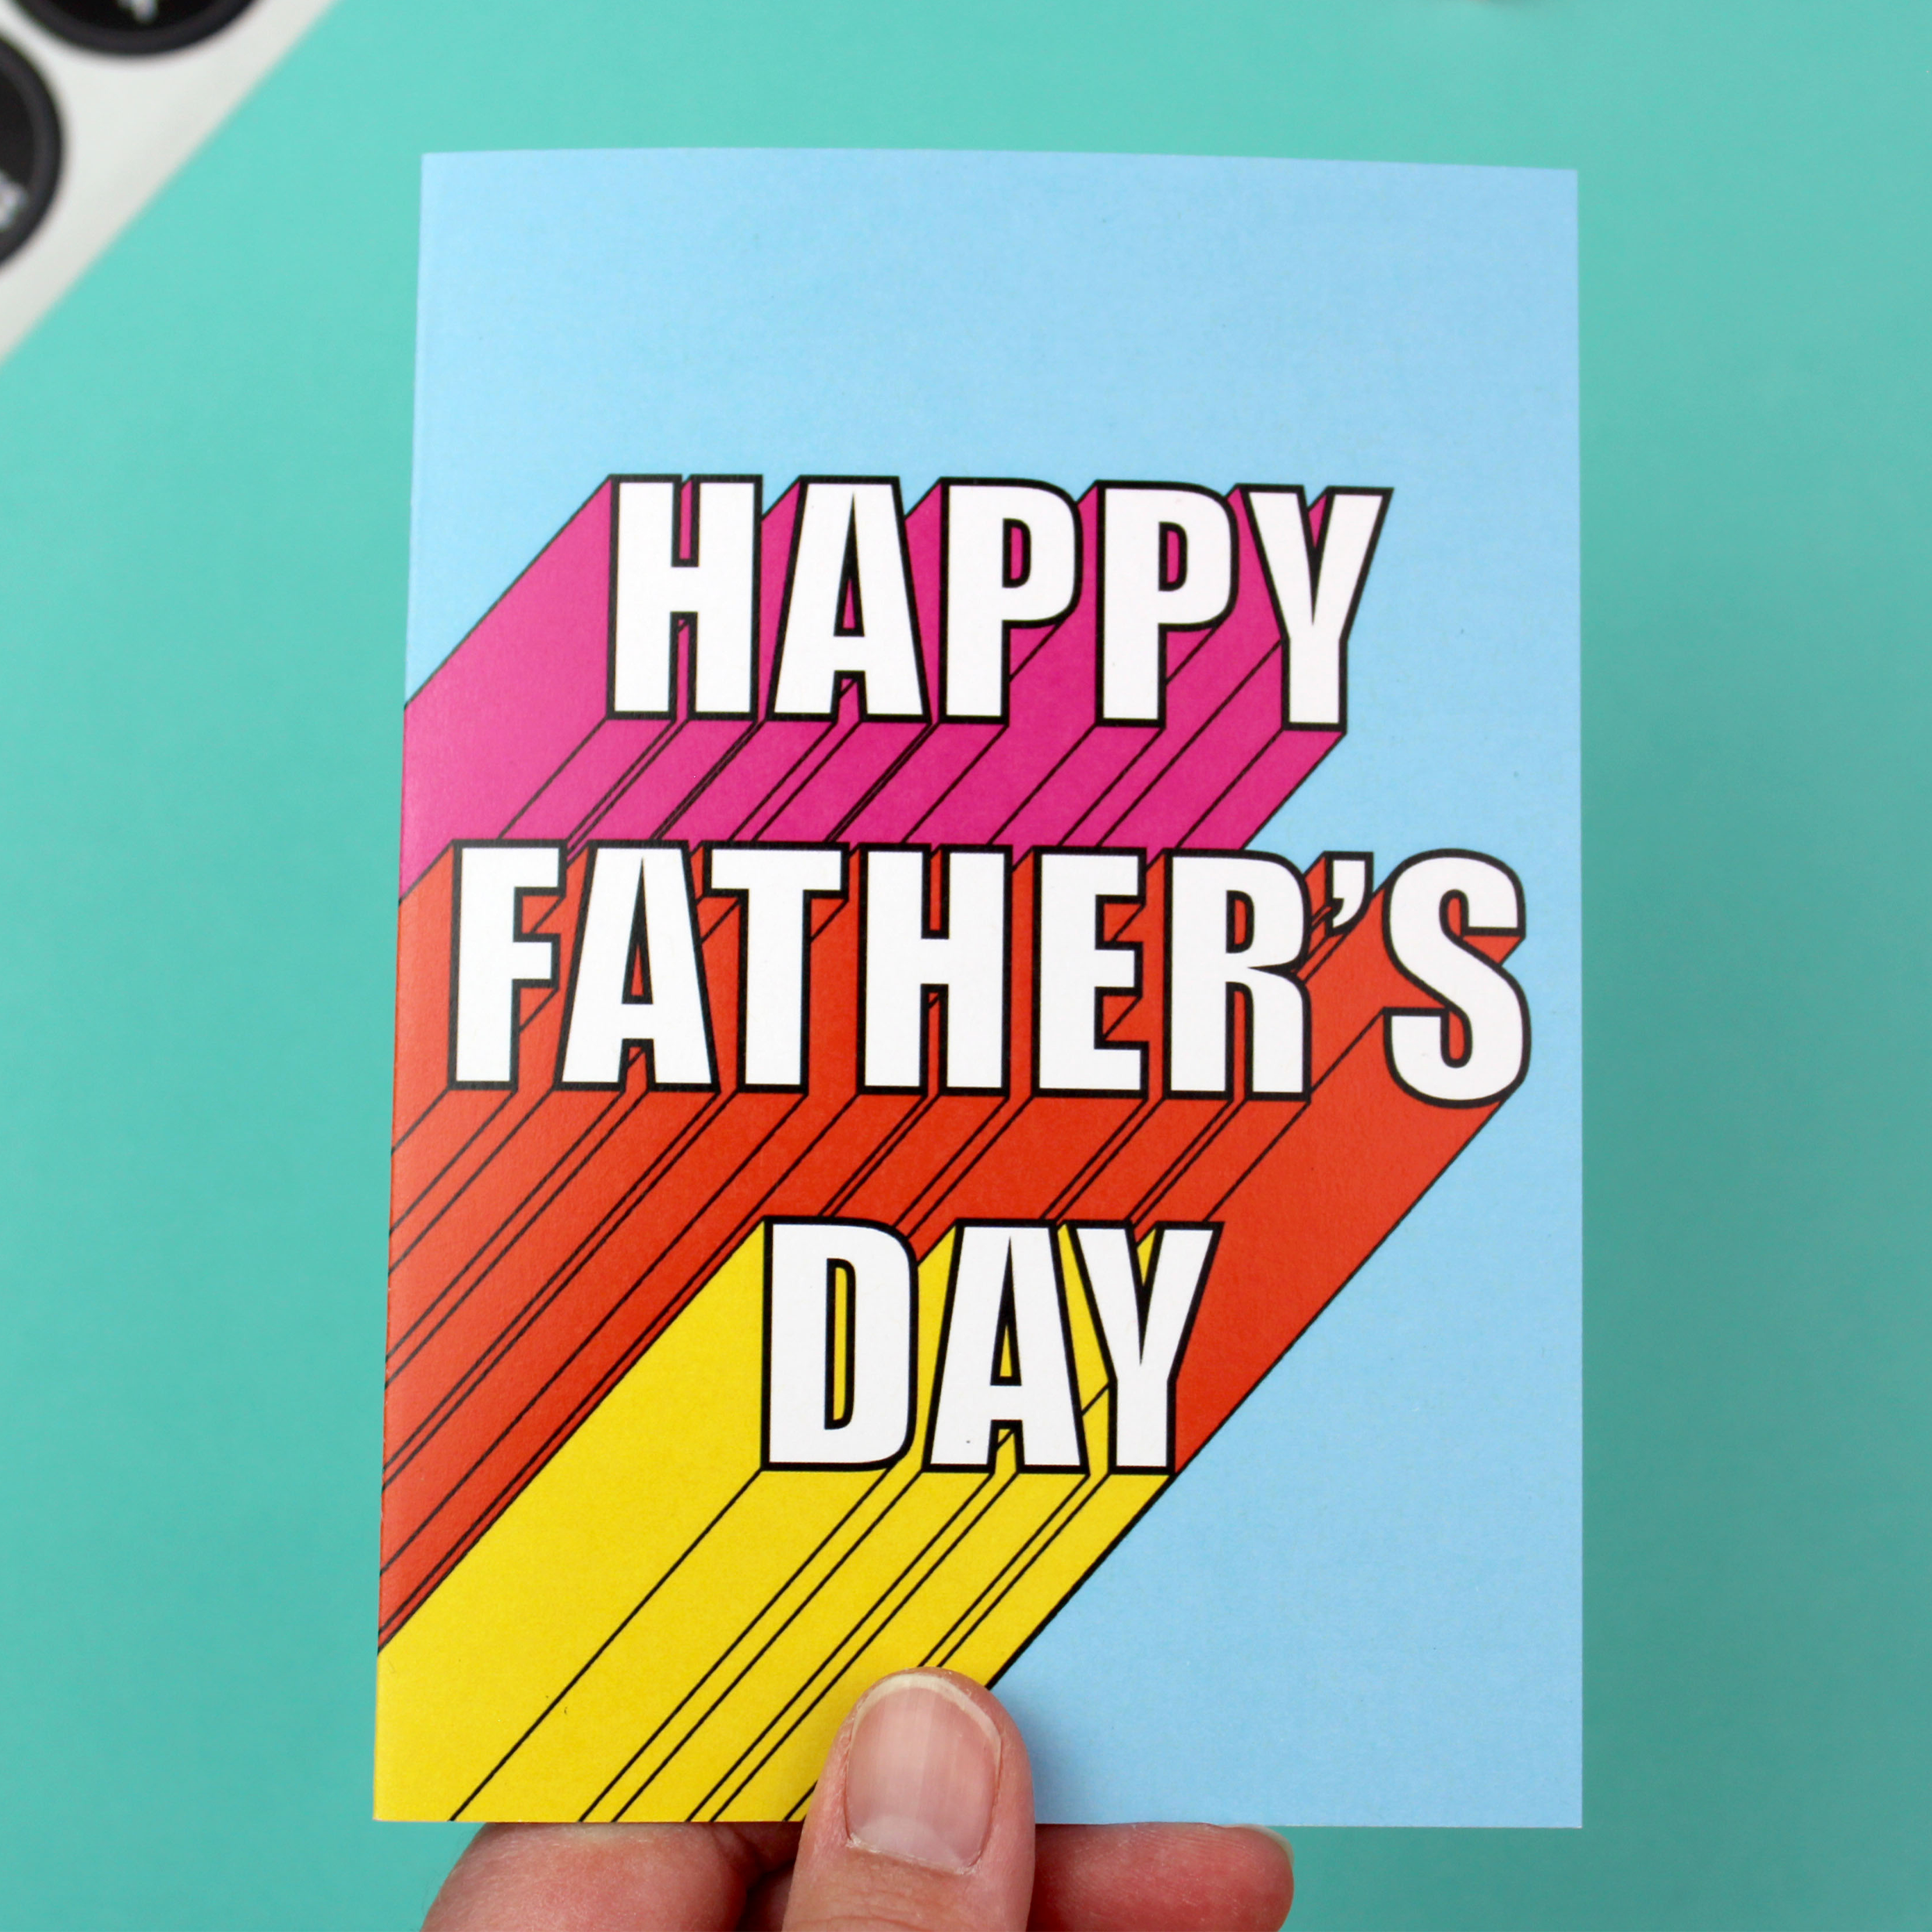 A hand holds a blue cards and a yellow envelope. The card has white writing that reads 'Happy Father's Day'. It has a 3D effect, with pink, orange and yellow colours.